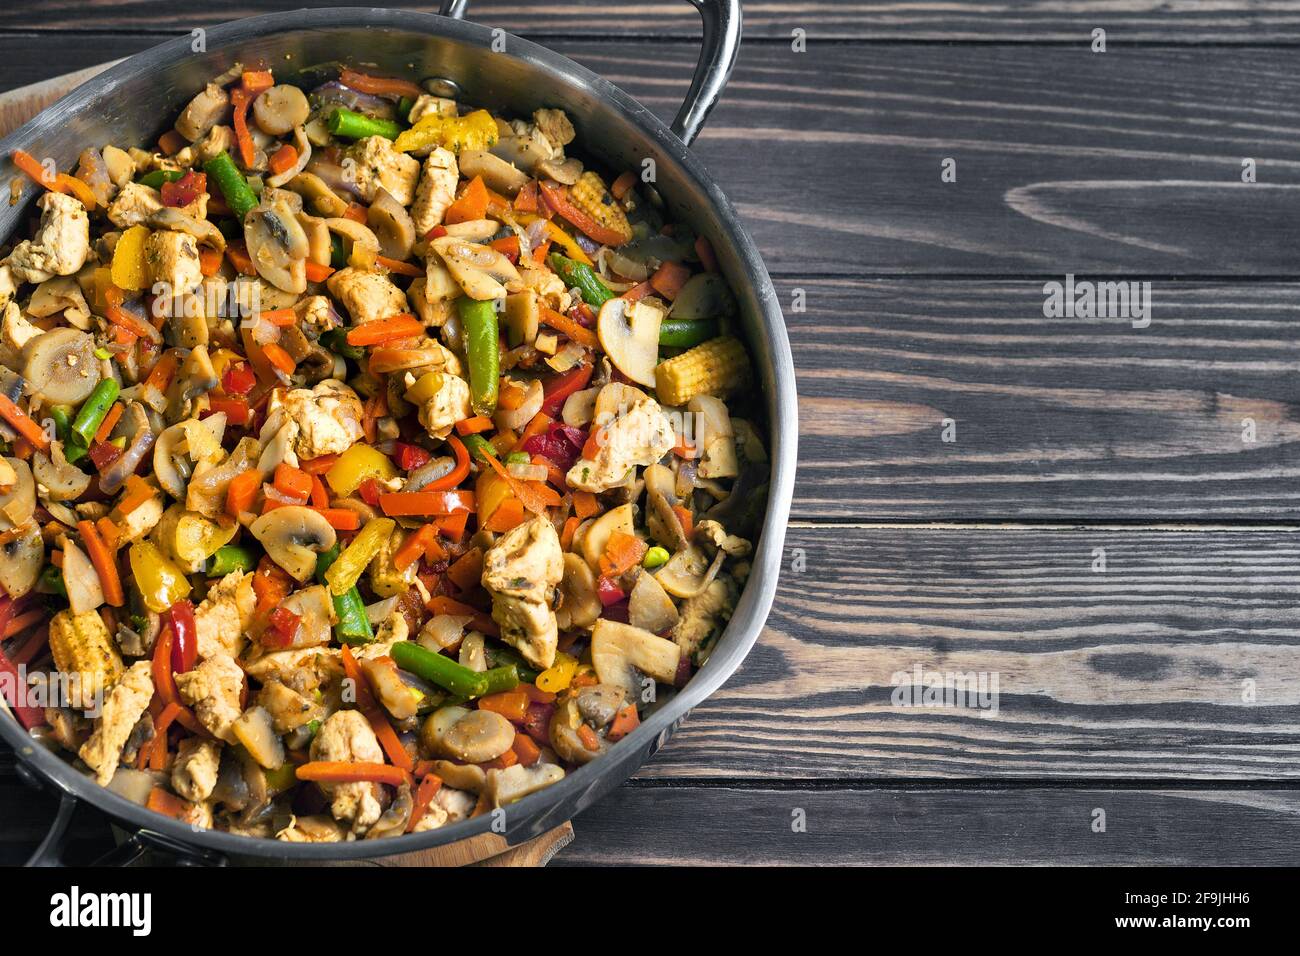 Fried chicken with a mix of vegetables in a frying pan on a wooden table top. Vegetable stew.  Stock Photo